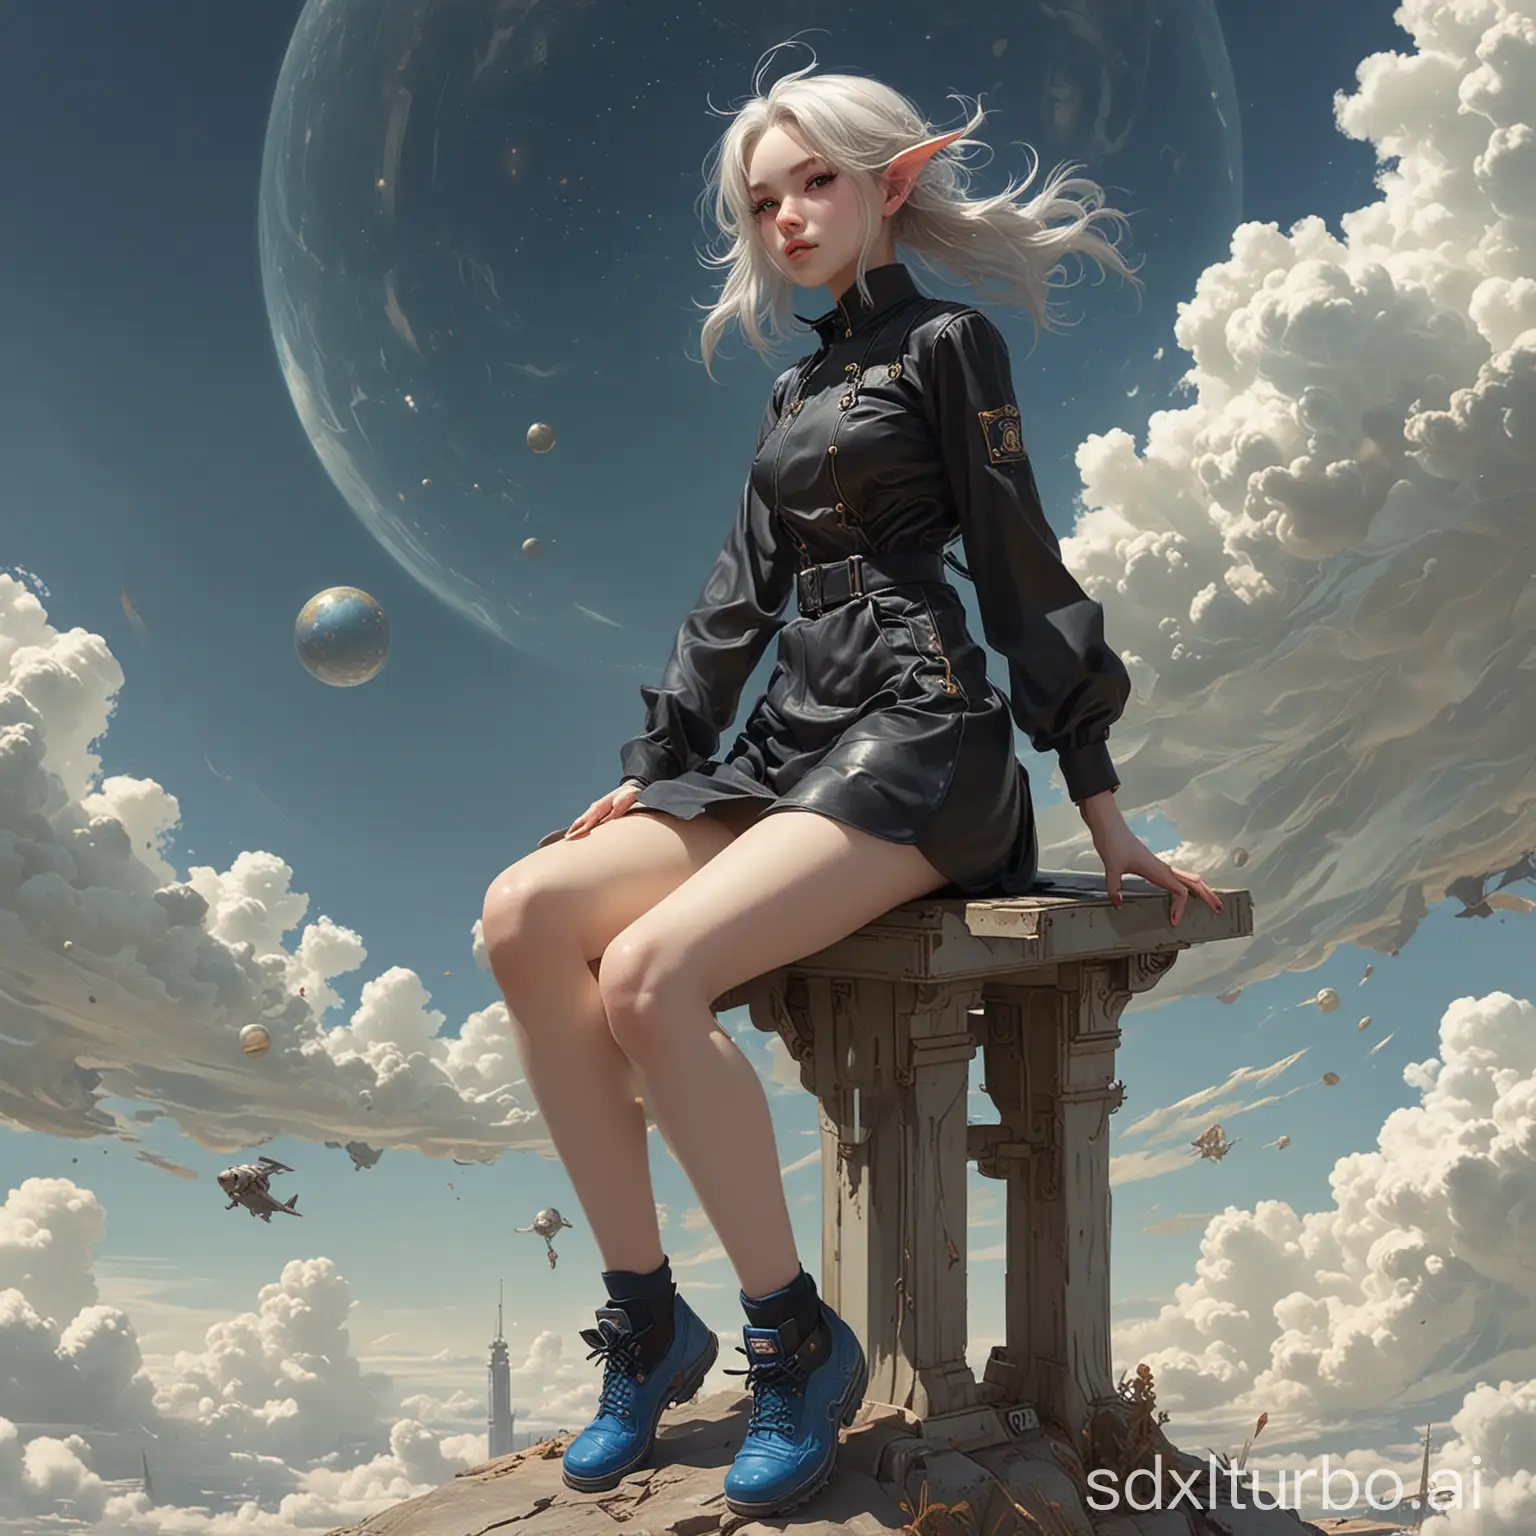 Ethereal-Fantasy-Art-Bunny-Girl-in-Blue-Shoe-and-Black-Tight-Shirt-on-White-Background